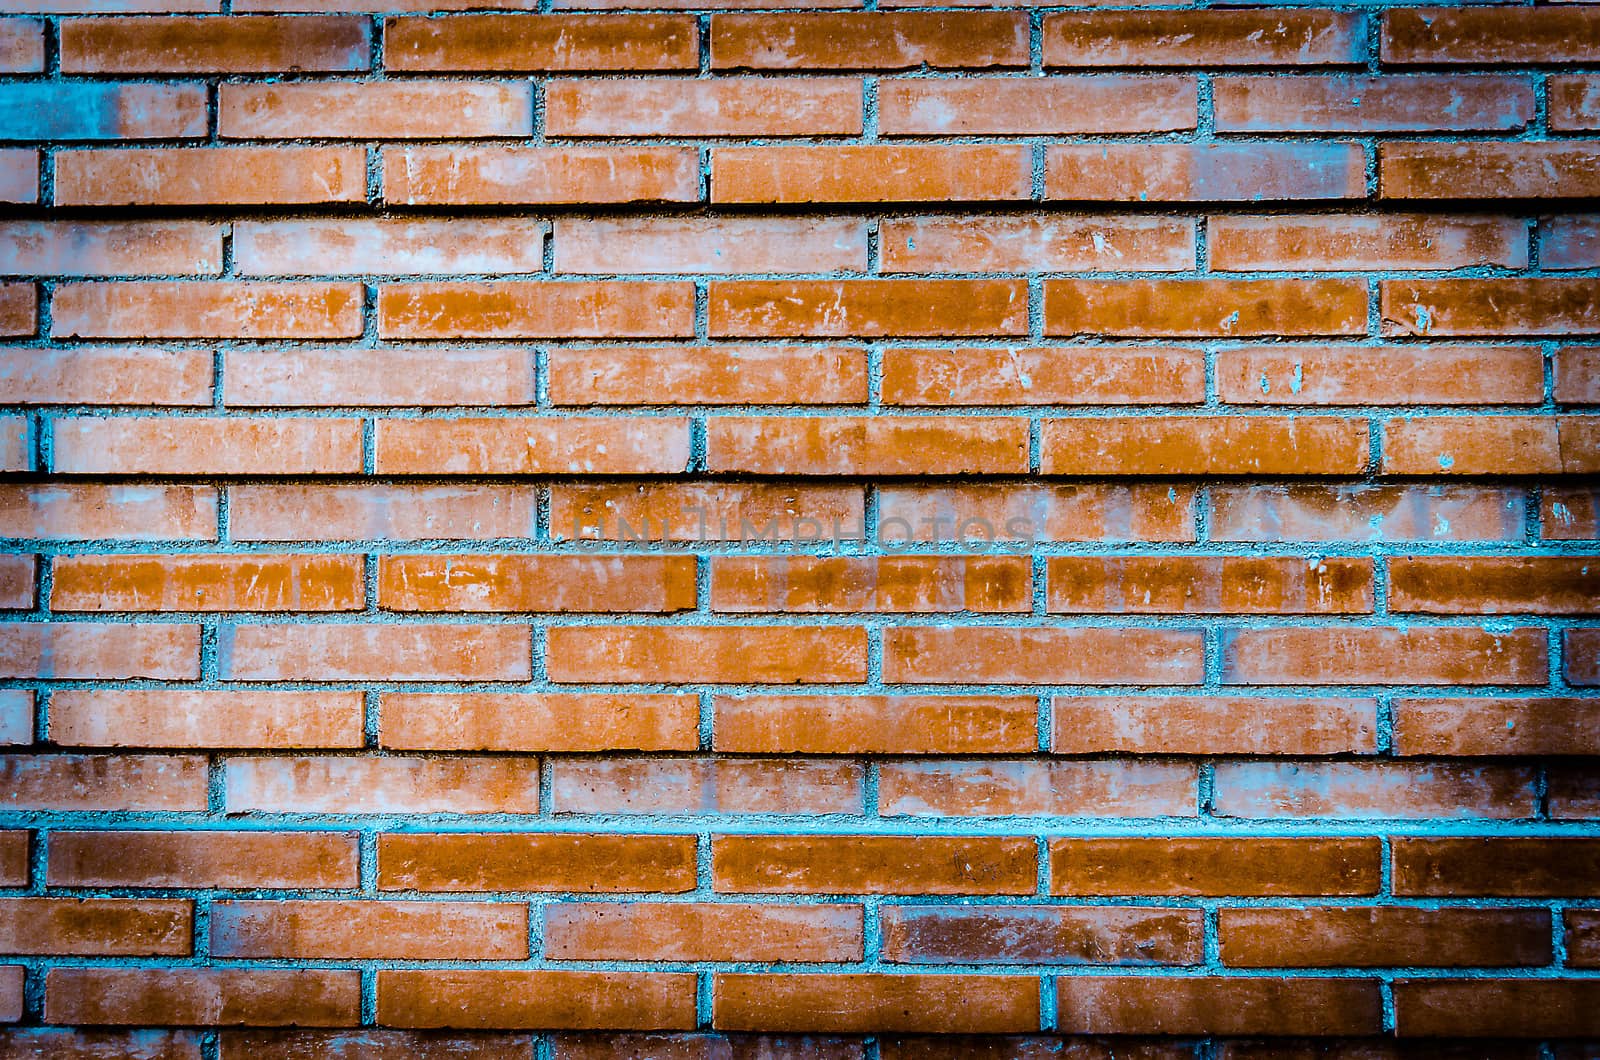 Abstract background with old brick wall. Vintage Photos